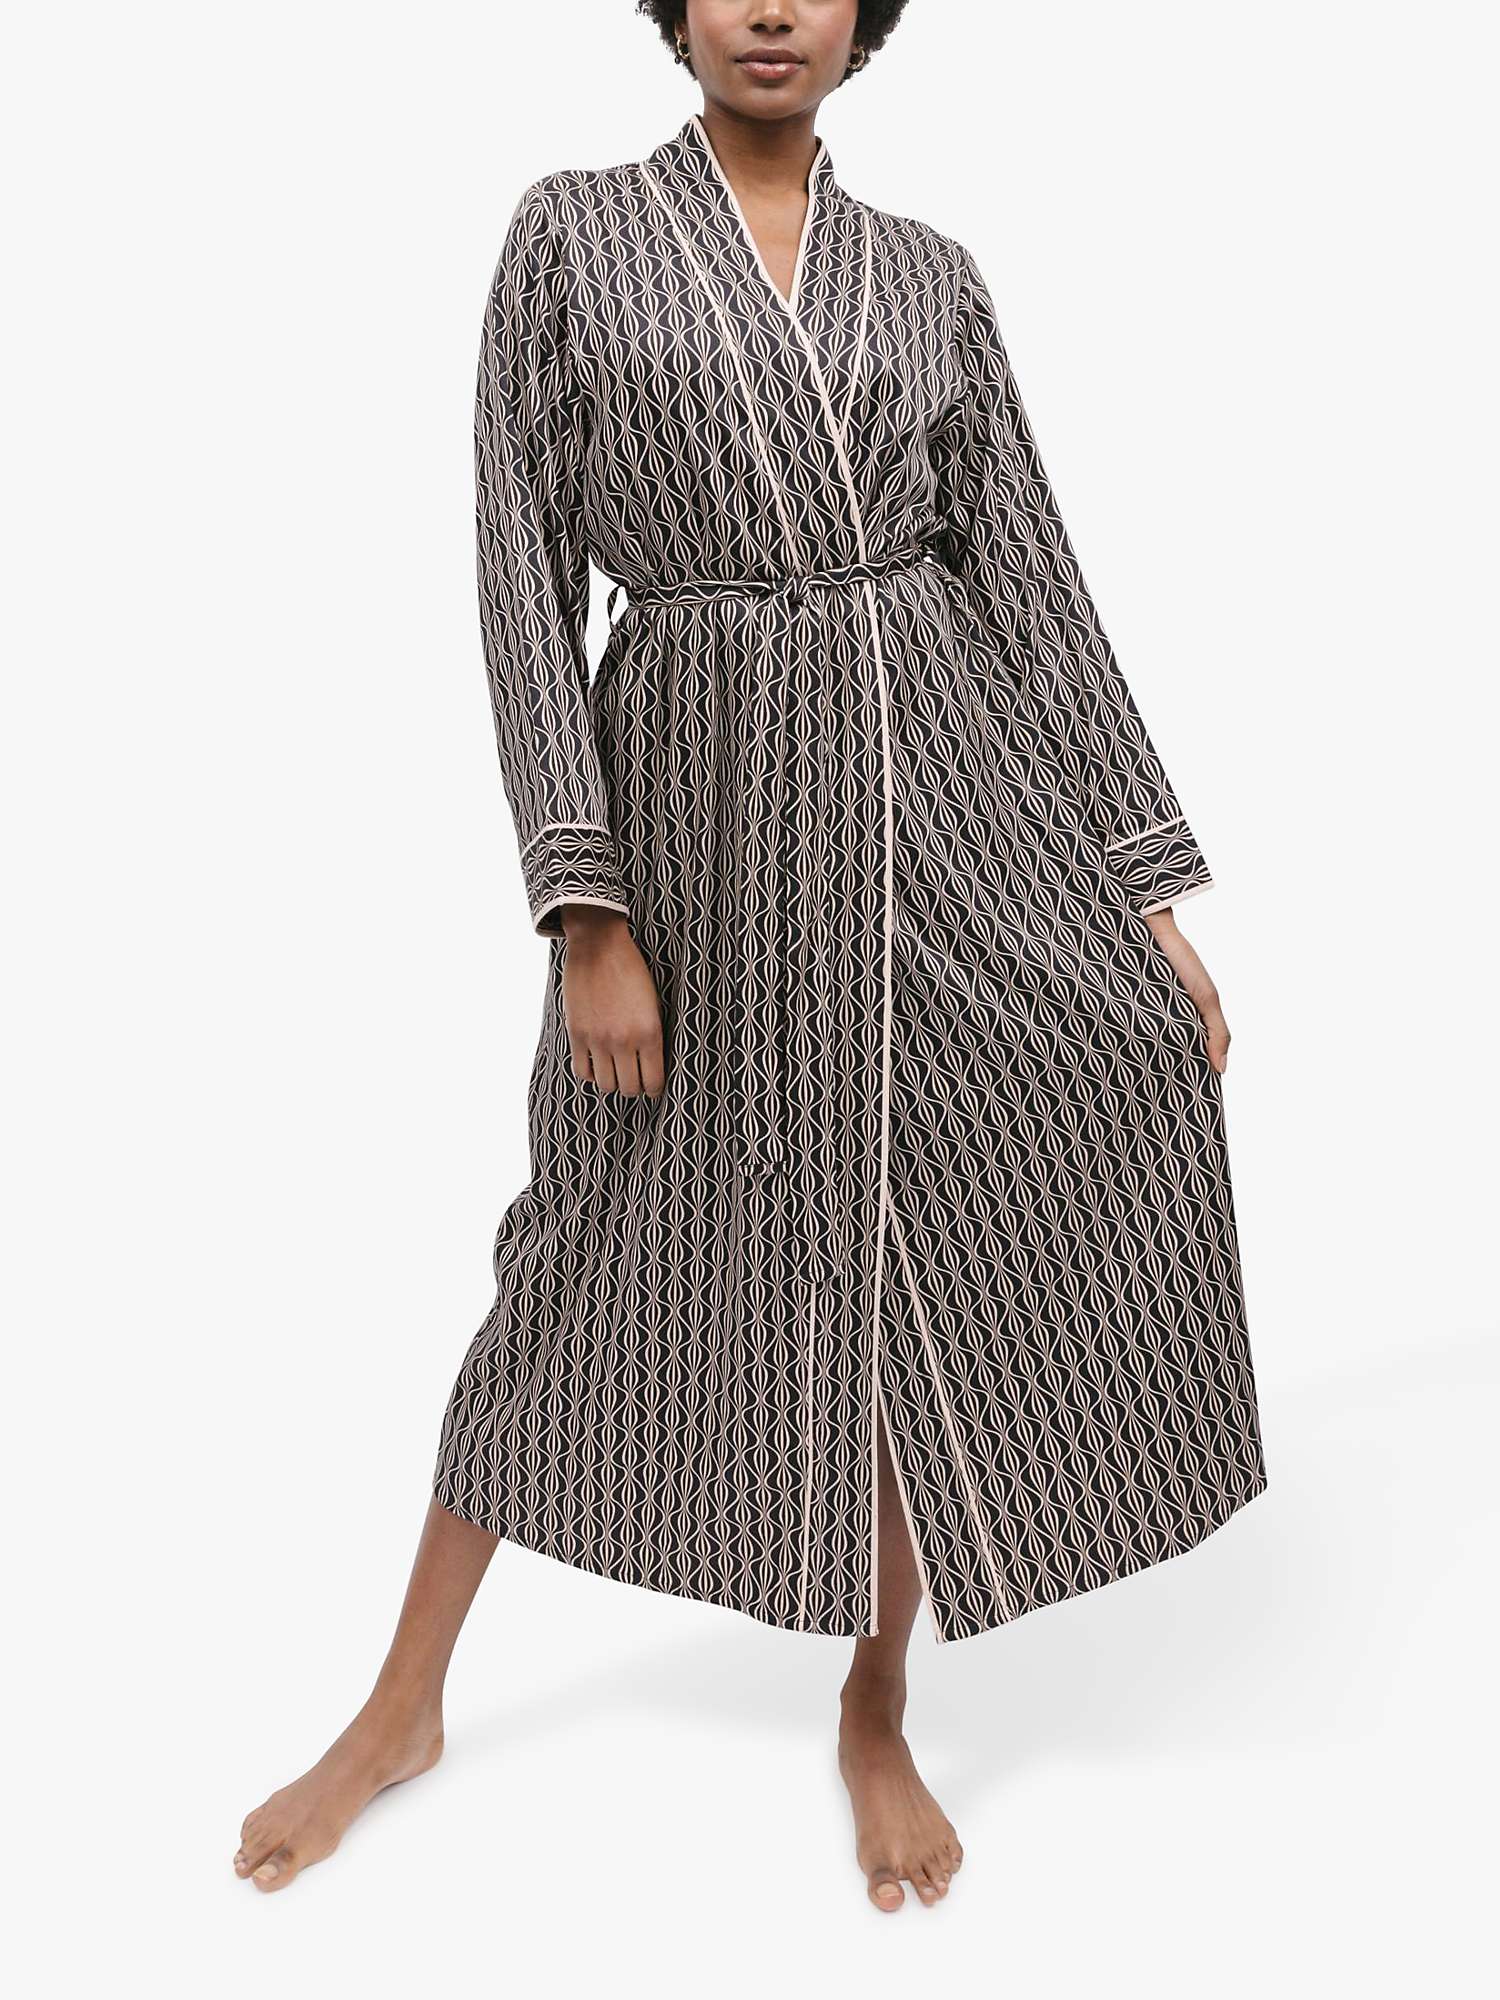 Buy Fable & Eve Brixton Geometric Print Long Dressing Gown, Black Online at johnlewis.com